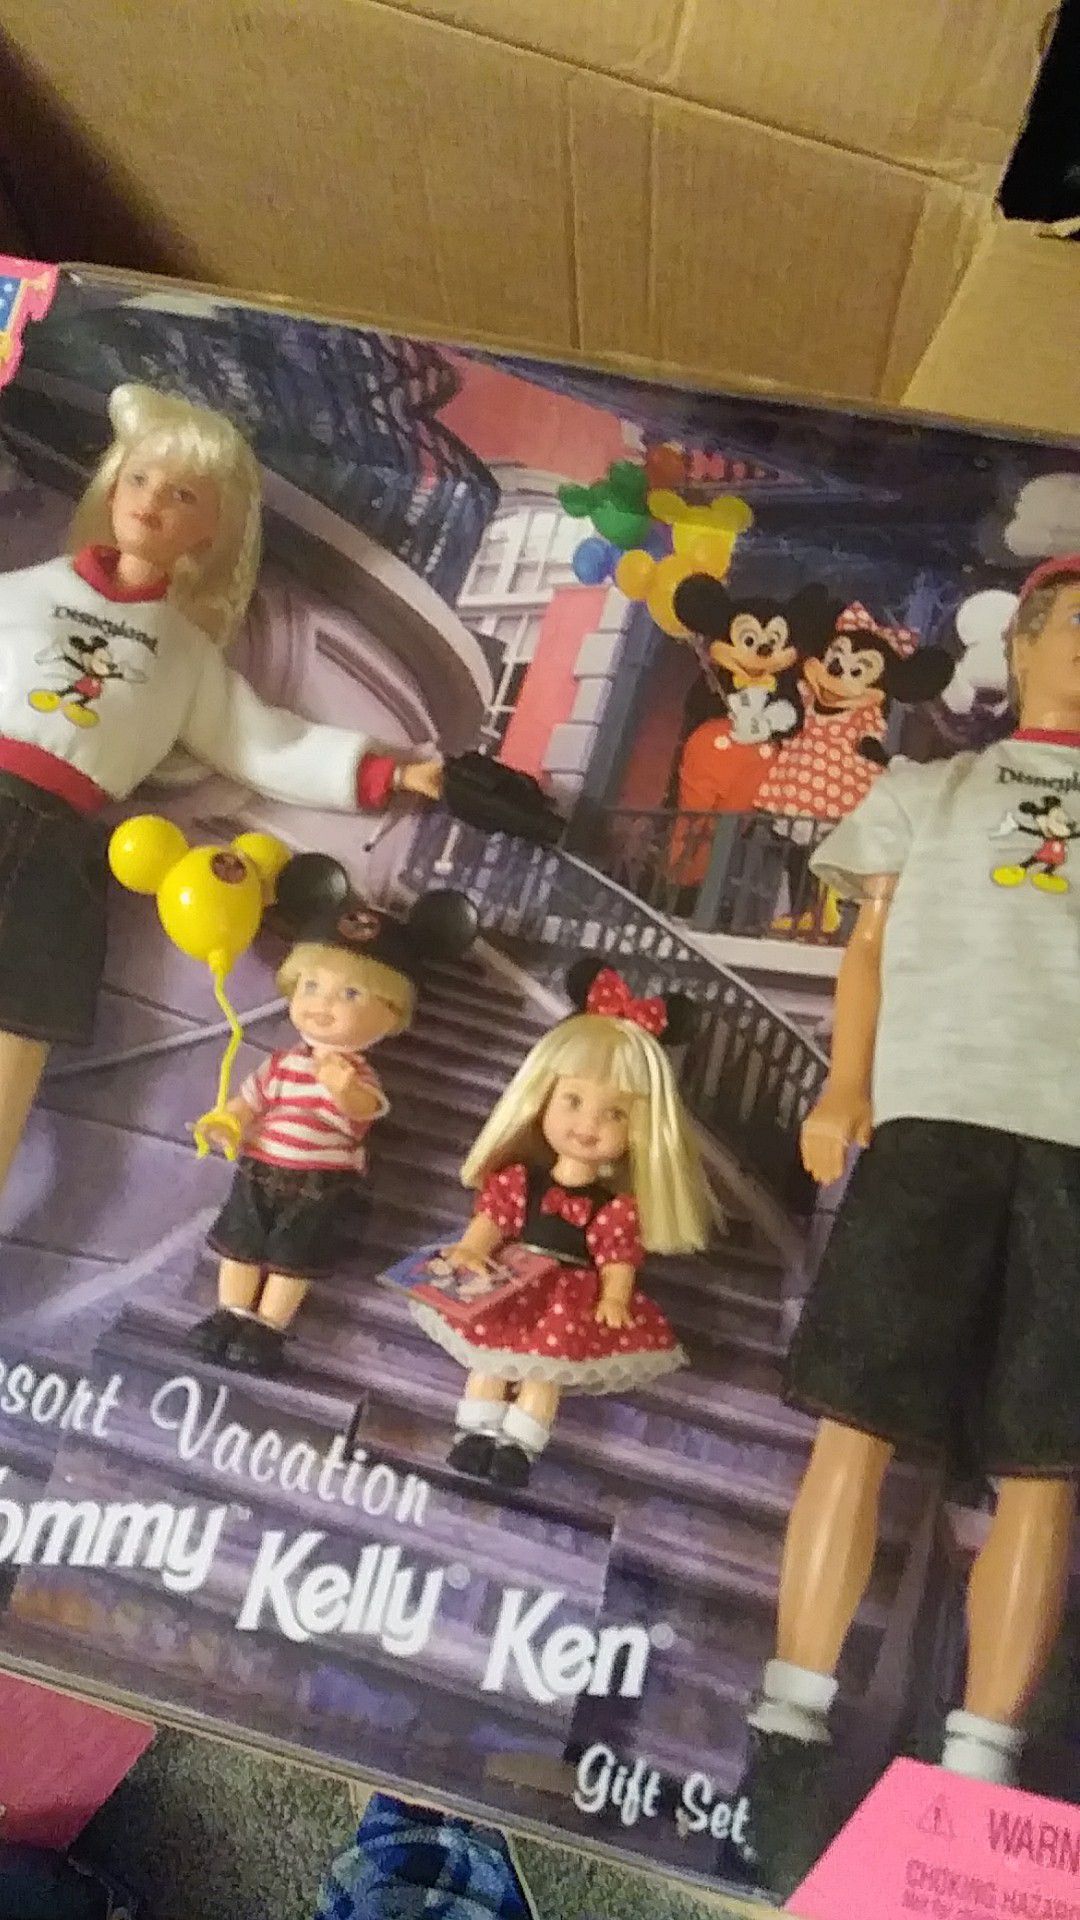 Disney land resort vacation with Barbie Tommy kelly ken